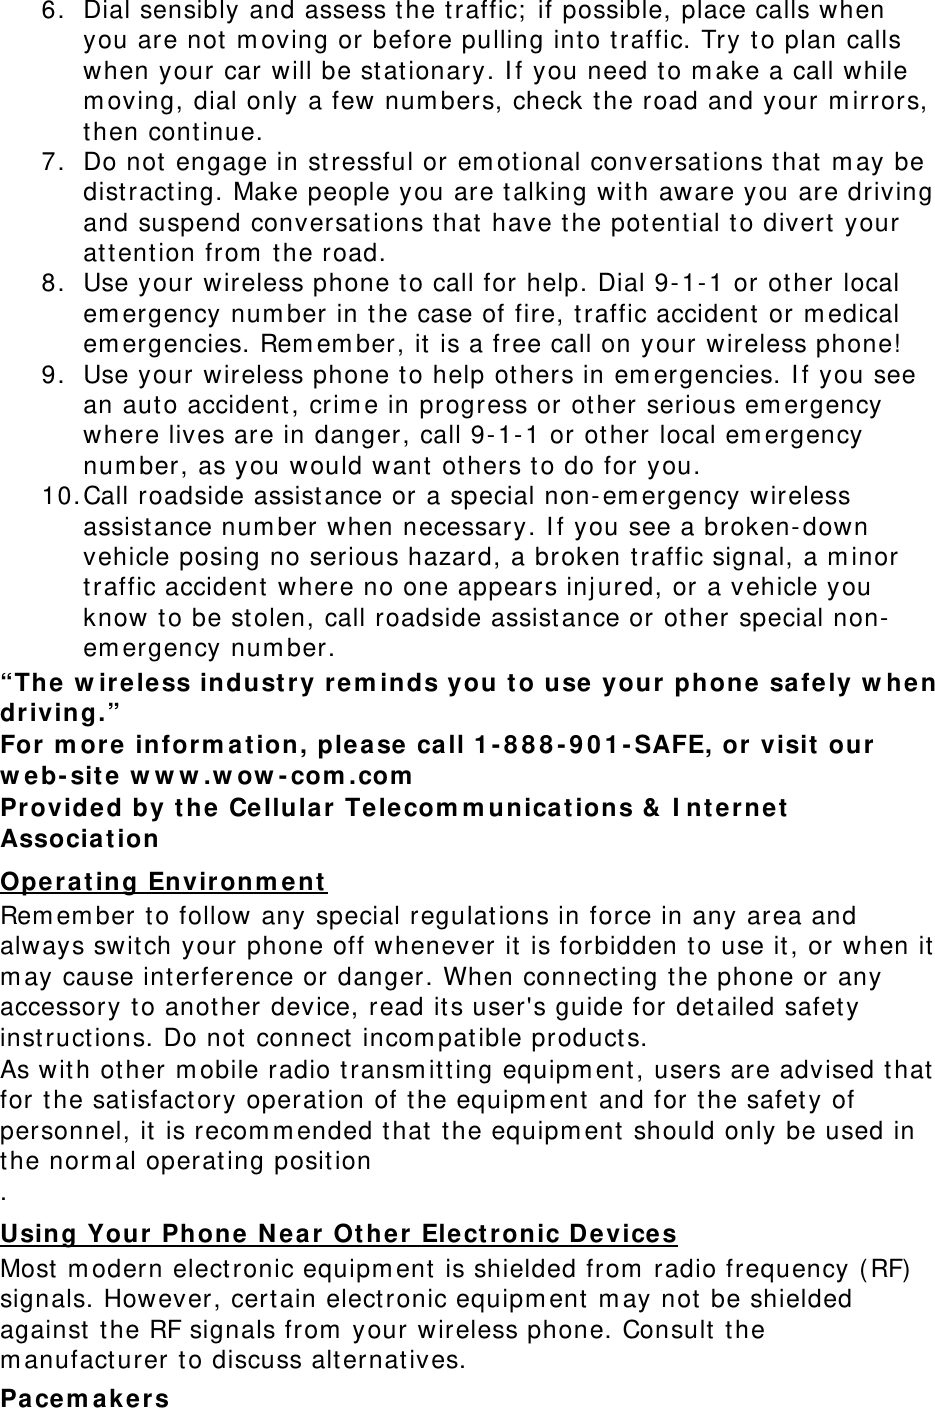 6. Dial sensibly and assess t he t raffic;  if possible, place calls when you are not m oving or before pulling into t raffic. Try t o plan calls when your car will be st at ionary. I f you need to m ake a call while m oving, dial only a few num bers, check the road and your m irrors, then cont inue. 7. Do not engage in st ressful or em ot ional conversat ions that  m ay be dist racting. Make people you are t alking wit h aware you are driving and suspend conversat ions t hat  have t he pot ent ial to divert  your att ent ion from  t he road. 8. Use your wireless phone t o call for help. Dial 9- 1- 1 or ot her local em ergency num ber in t he case of fire, t raffic accident  or m edical em ergencies. Rem em ber, it is a free call on your wireless phone!  9. Use your wireless phone t o help ot hers in em ergencies. I f you see an auto accident , crim e in progress or ot her serious em ergency where lives are in danger, call 9- 1- 1 or ot her local em ergency num ber, as you would want  ot hers t o do for you. 10. Call roadside assist ance or a special non- em ergency wireless assistance num ber when necessary. I f you see a broken-down vehicle posing no serious hazard, a broken t raffic signal, a m inor traffic accident  where no one appears inj ured, or a vehicle you know to be st olen, call roadside assist ance or ot her special non-em ergency num ber. “The  w ir e le ss indust ry re m inds you t o use your phone sa fe ly w hen dr iving.” For m ore inform a tion, ple ase  call 1 - 8 8 8 - 9 0 1 - SAFE, or  visit  our w eb- sit e  w w w .w ow - com .com  Provided by t he Cellula r Tele com m unicat ions &amp;  I nt ernet  Associa t ion  Operat ing Environm ent  Rem em ber t o follow any special regulations in force in any area and always swit ch your phone off whenever it  is forbidden to use it, or when it m ay cause int erference or danger. When connect ing t he phone or any accessory to another device, read its user&apos;s guide for det ailed safet y inst ruct ions. Do not connect  incom patible product s. As wit h other m obile radio t ransm itt ing equipm ent , users are advised that  for t he sat isfact ory operat ion of t he equipm ent  and for t he safet y of personnel, it  is recom m ended t hat  the equipm ent  should only be used in the norm al operat ing position  . Using Your Phone  N ear  Ot her Elect ronic D e vice s Most  m odern elect ronic equipm ent is shielded from  radio frequency ( RF) signals. However, certain elect ronic equipm ent m ay not  be shielded against  the RF signals from  your wireless phone. Consult t he m anufact urer t o discuss alternat ives. Pacem a k ers 